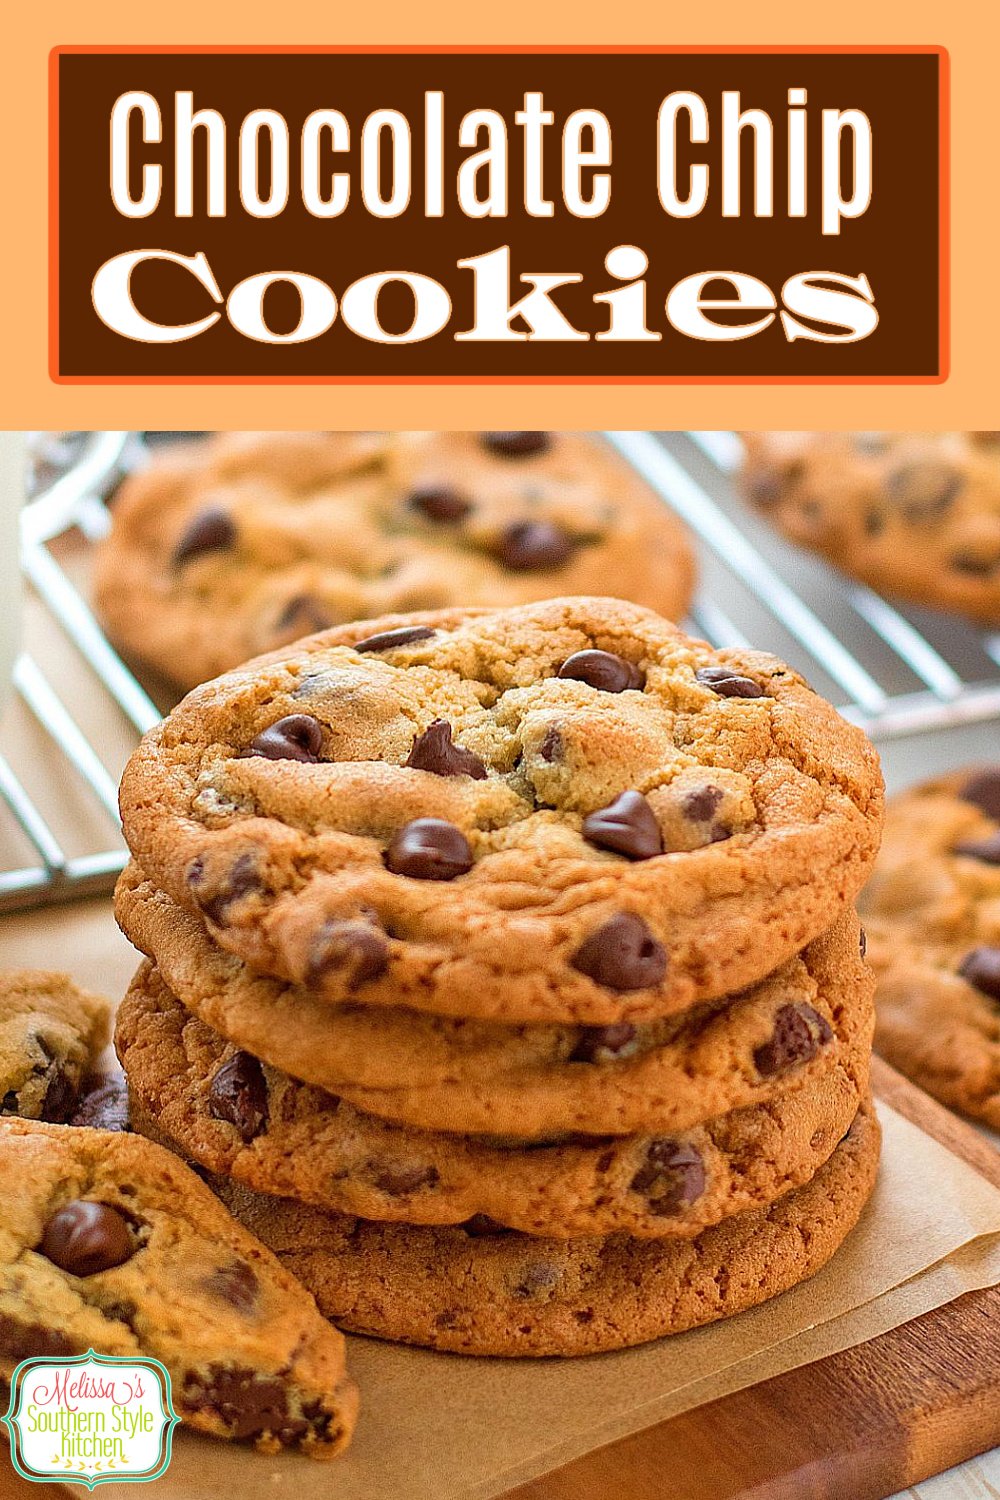 The king of all cookies these homemade Chocolate Chip Cookies never last long in your cookie jar #chocolatechipcookies #chocolate #bestcookierecipes #chocolatechipcookierecipe #holidaybaking #chocolatecookies #southernrecipes #southernfood #Christmascookies #desserts #dessertfoodrecipes via @melissasssk